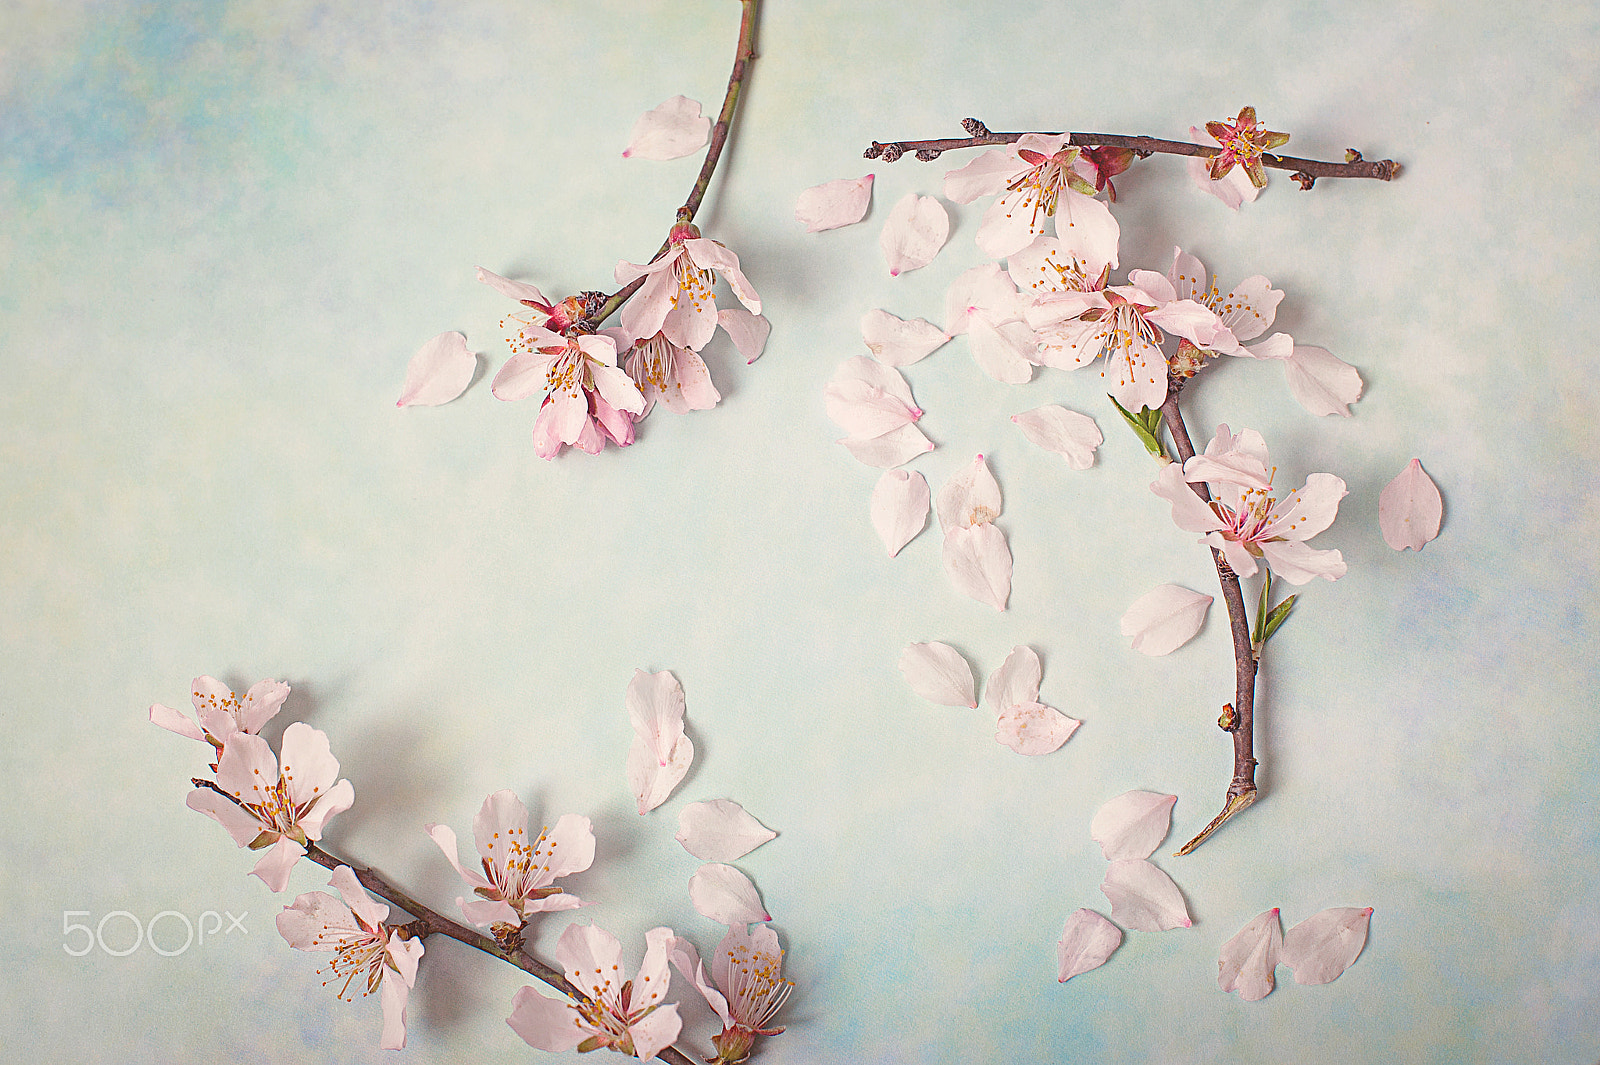 Nikon D700 sample photo. Spring flowering branch on abstract background. almond blossoms photography